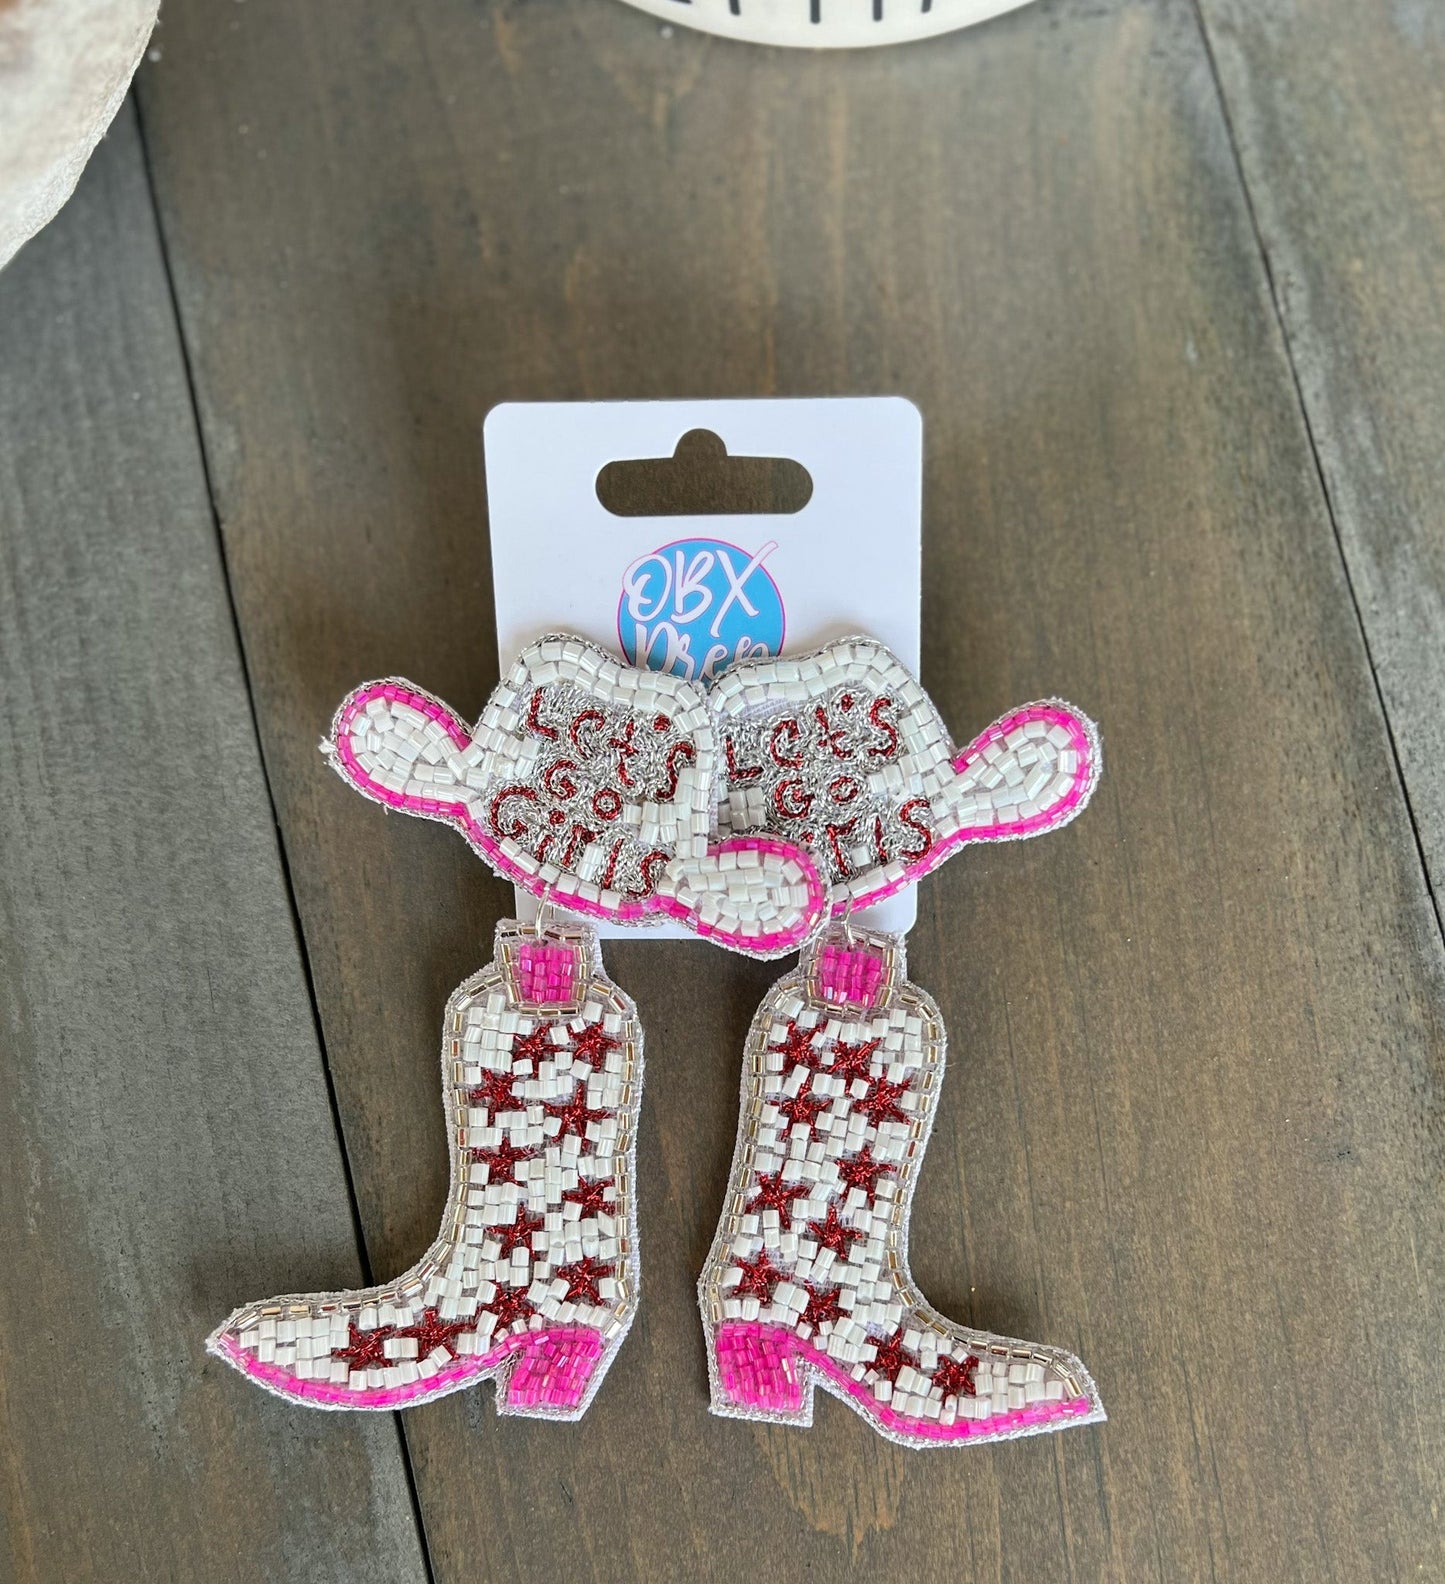 Let's Go Girls Cowgirl Boots and Hat Seed Beaded Dangle Earrings - OBX Prep